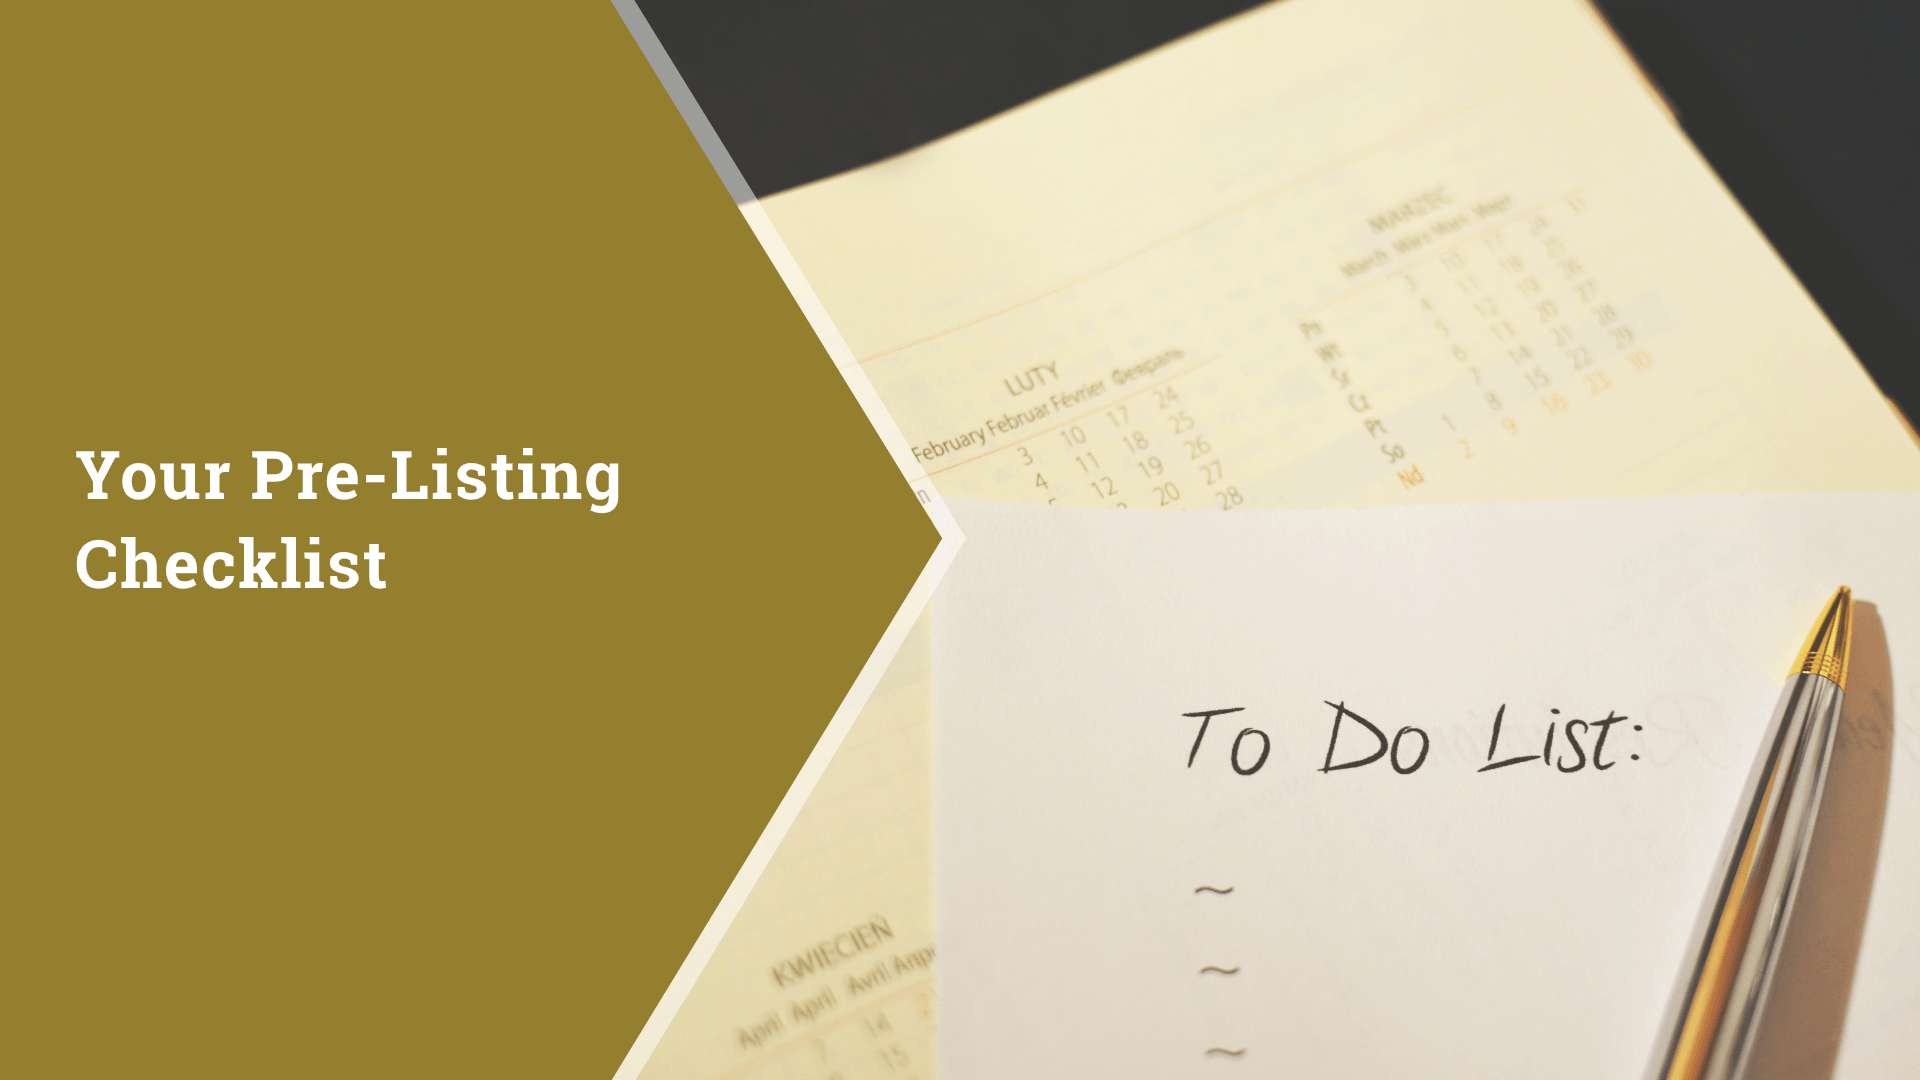 Your Pre-Listing Checklist from Florida Home Sales